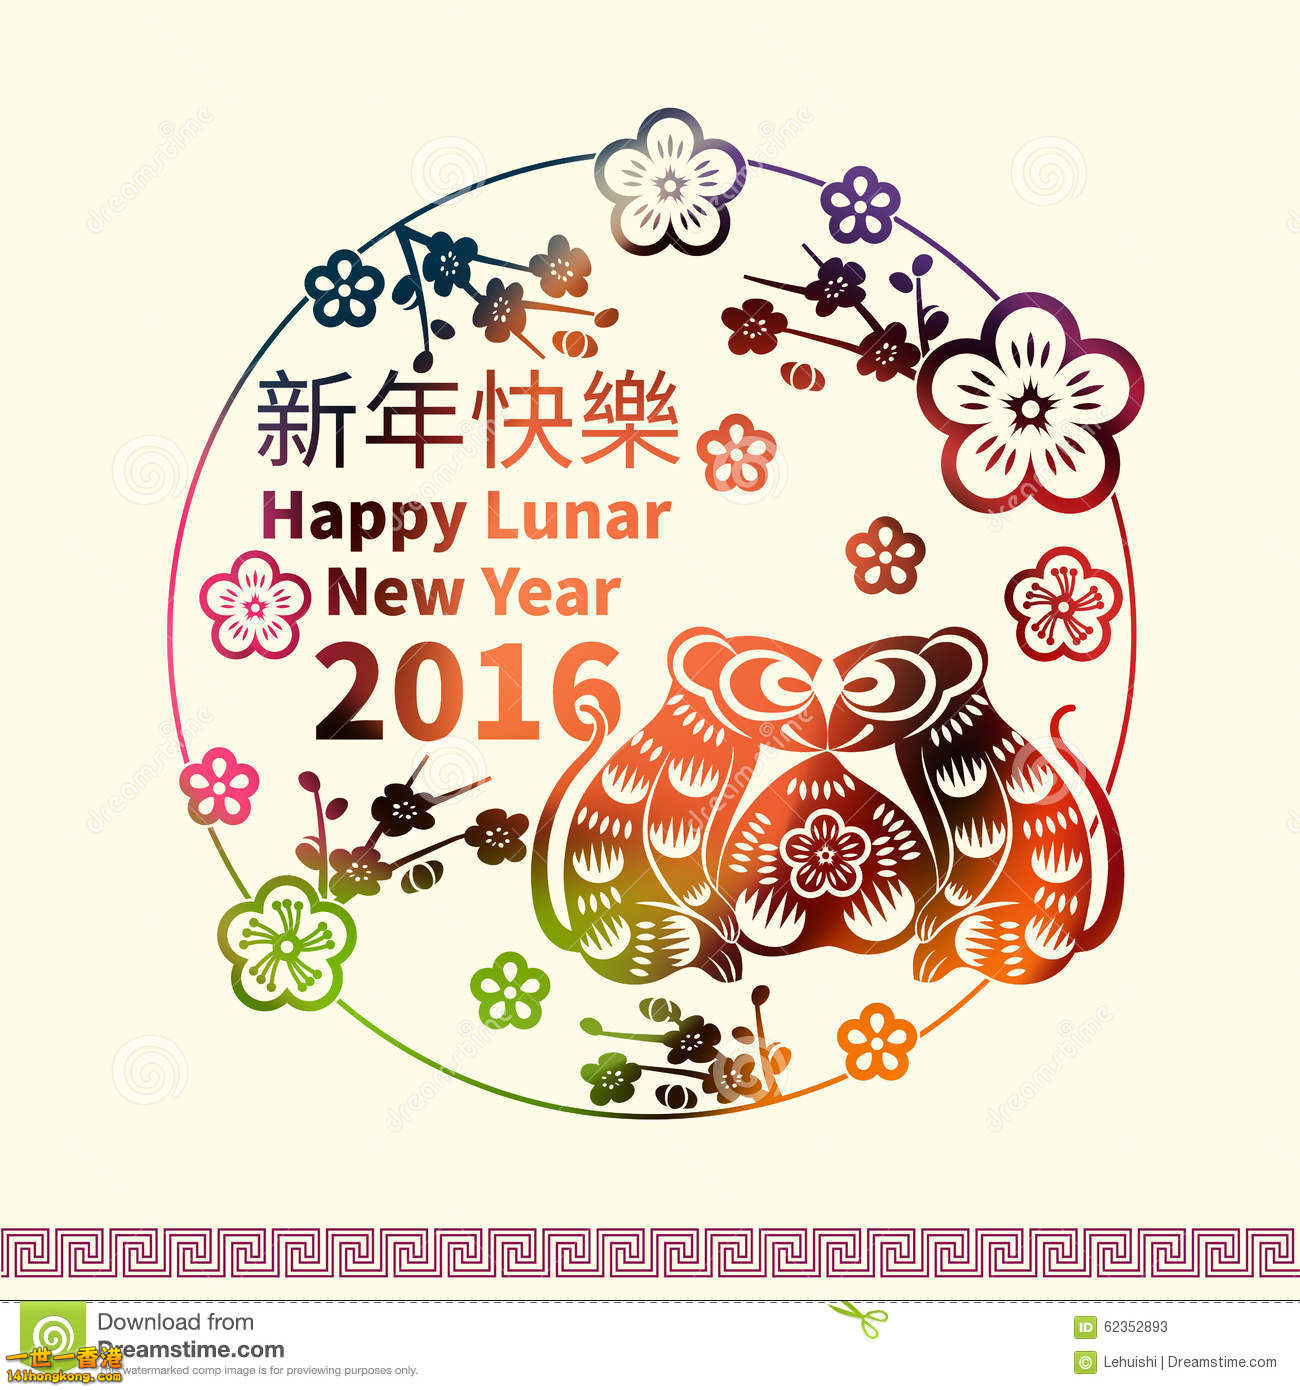 vector-chinese-new-year-greeting-card-background-paper-cut-monkey-asian-lunar-hi.jpg